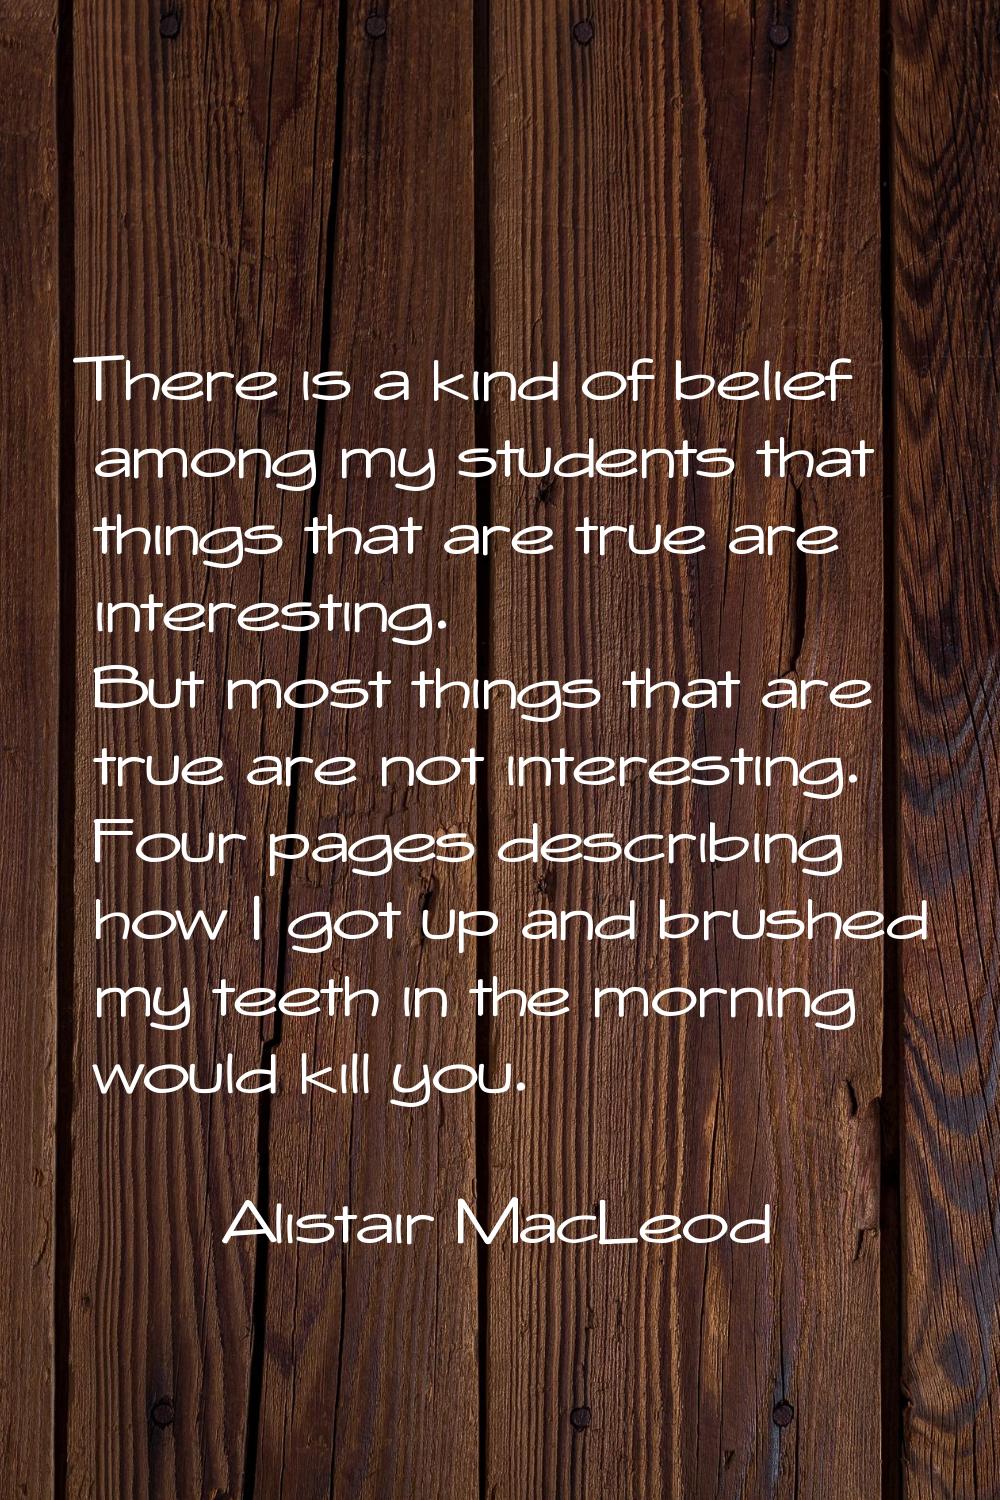 There is a kind of belief among my students that things that are true are interesting. But most thi